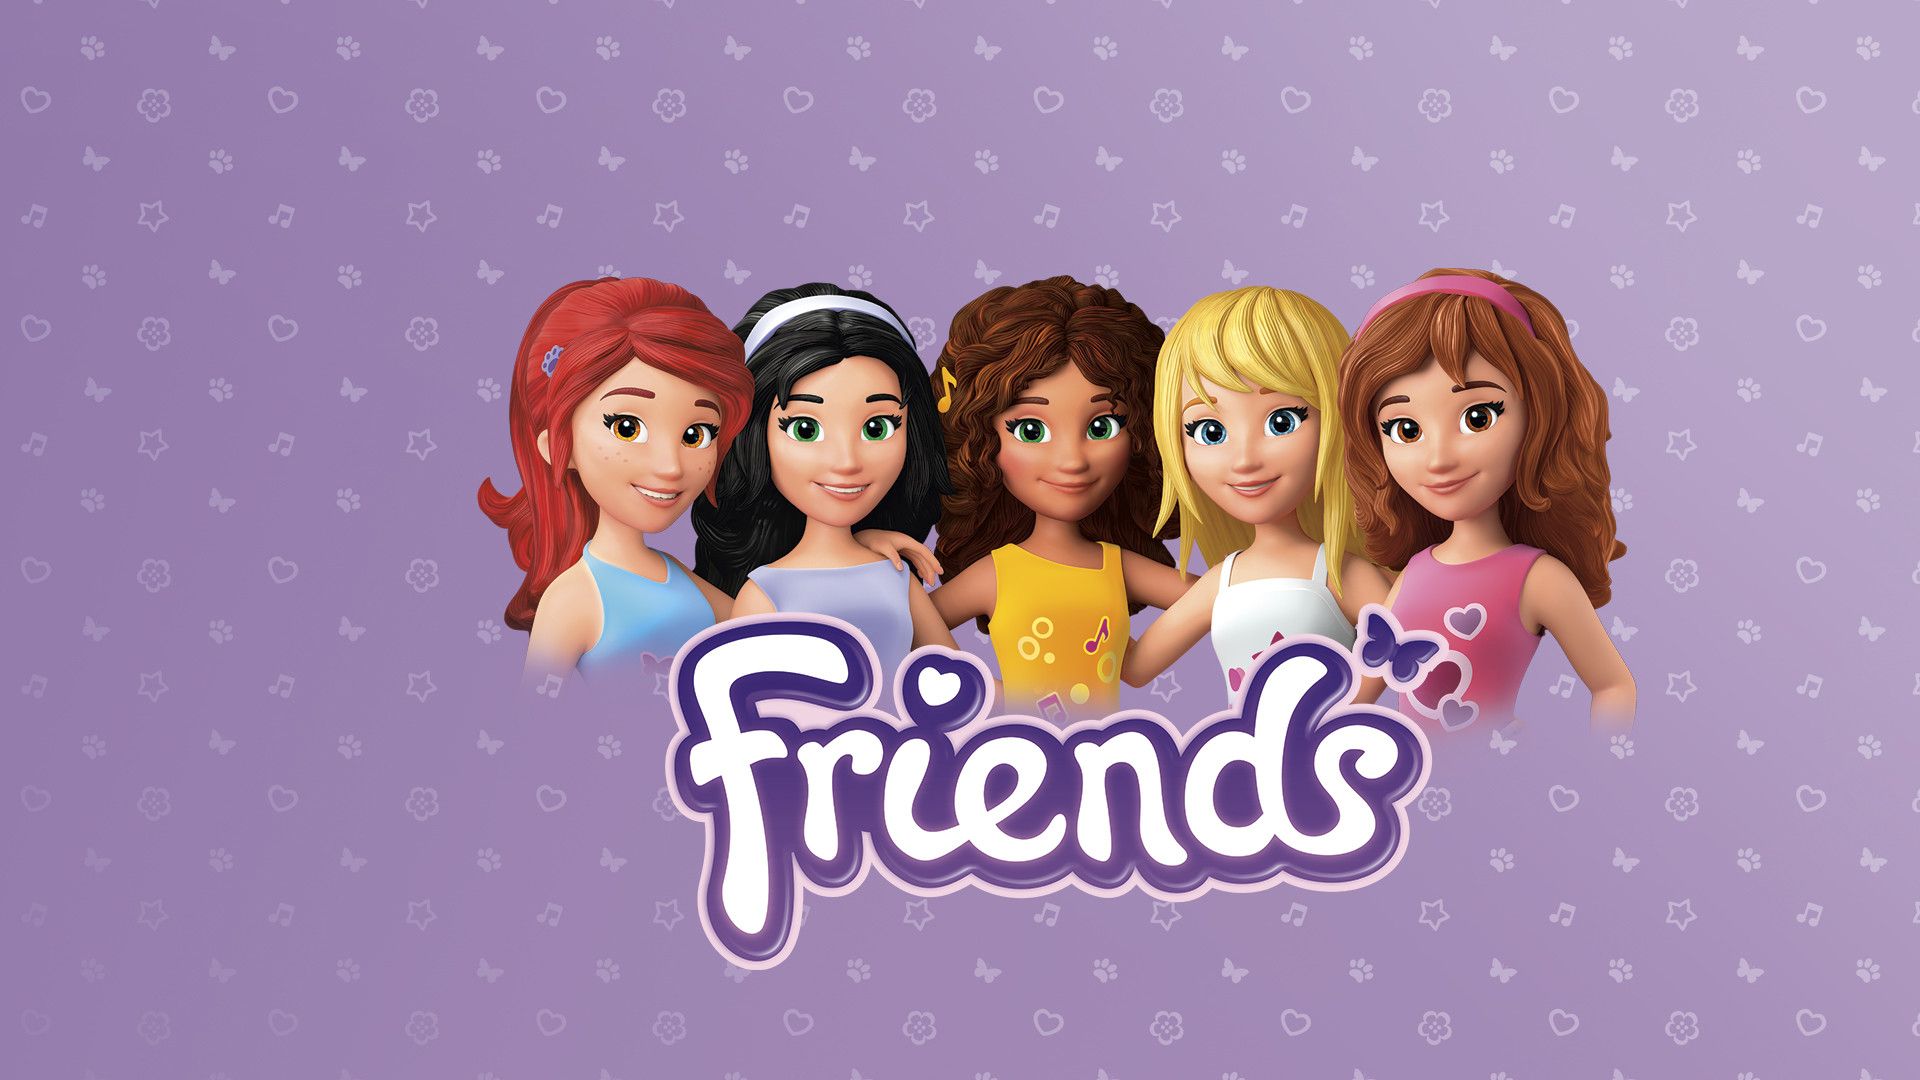 Lego Friends Wallpapers on WallpaperDog